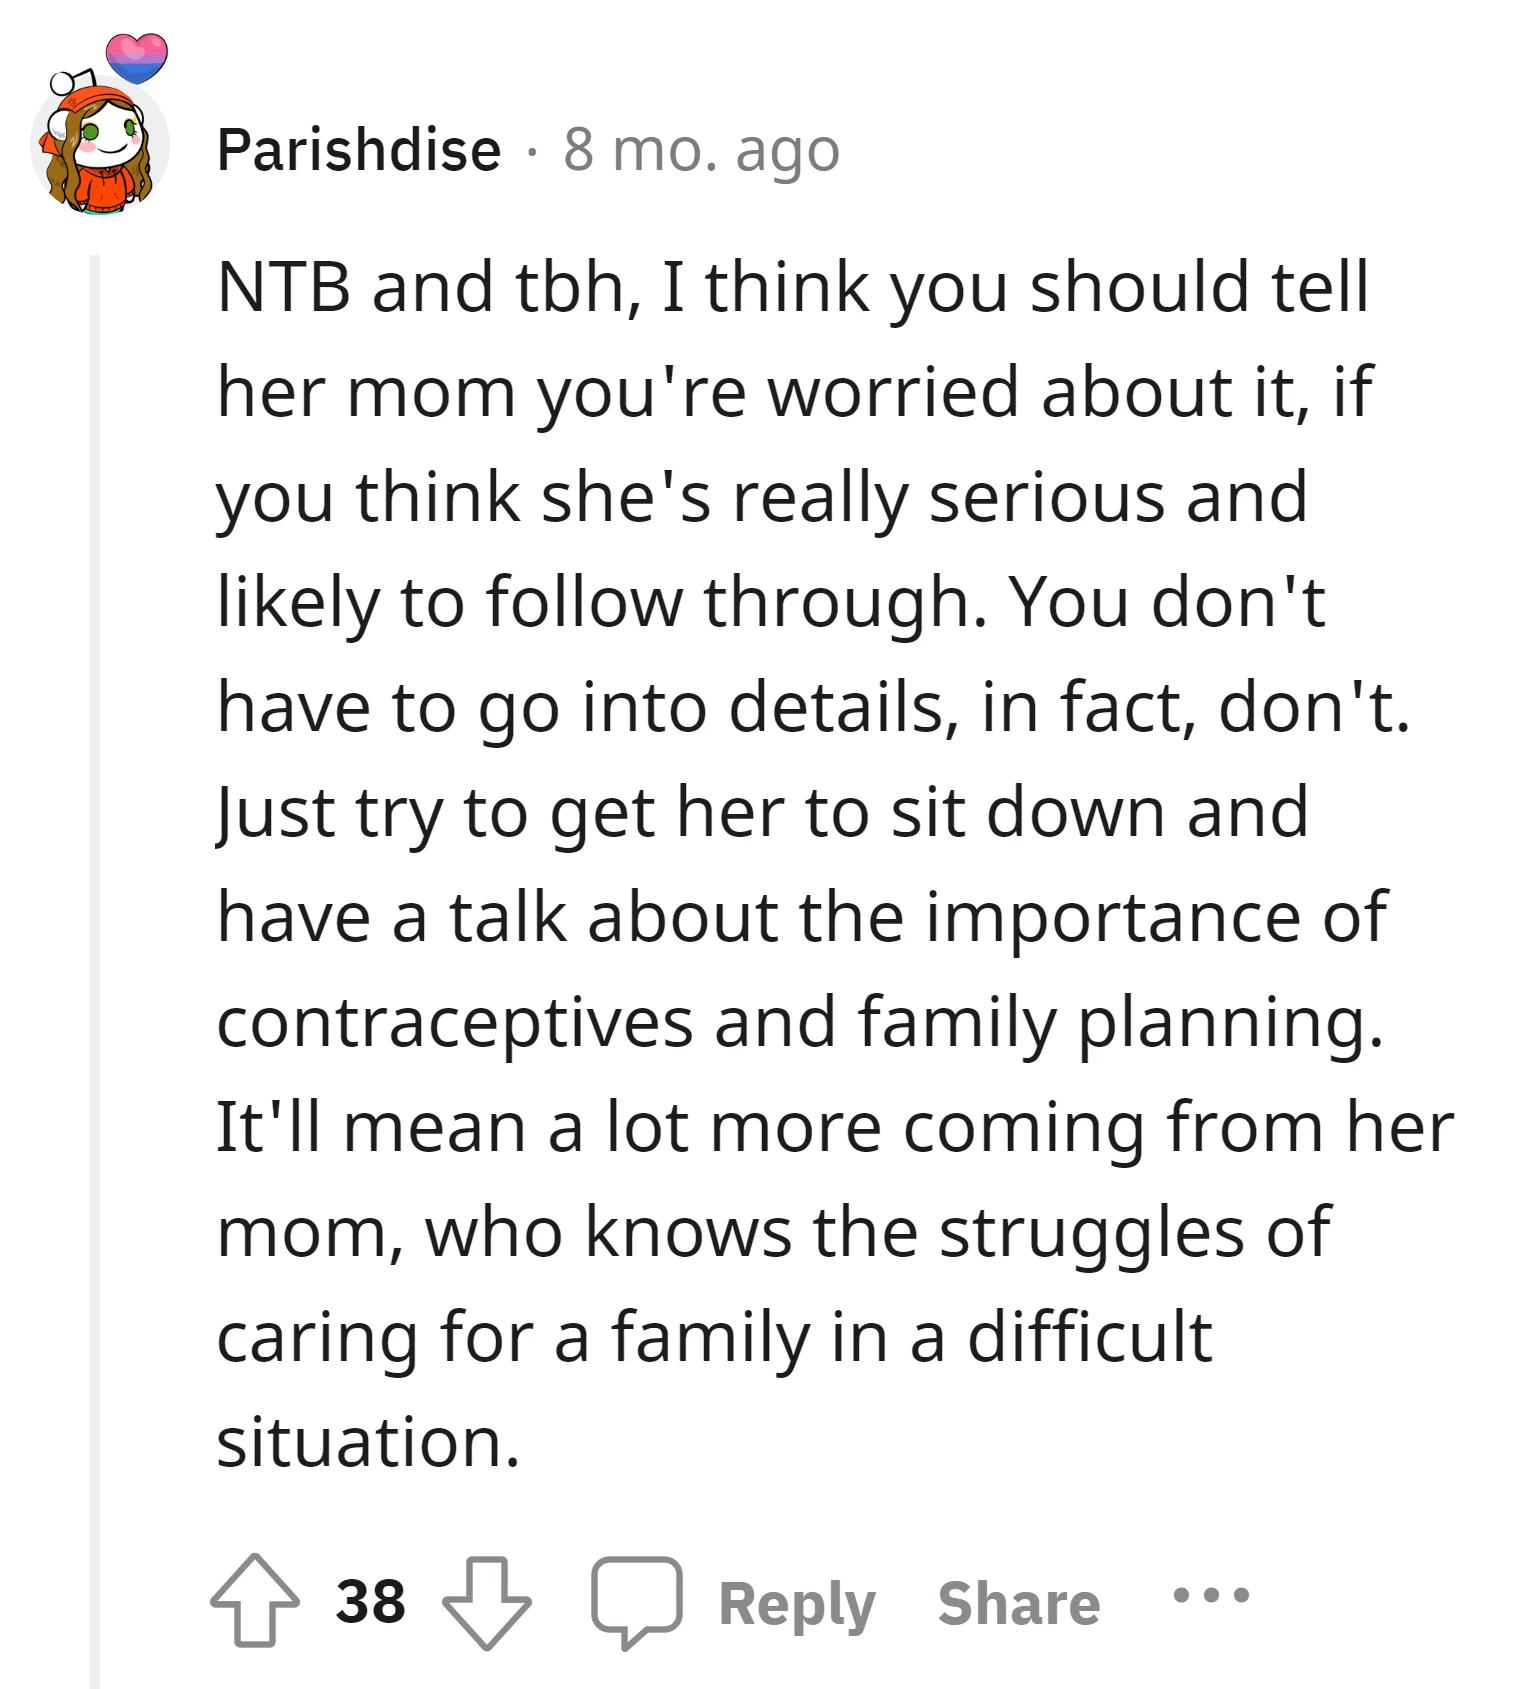 Commenter expresses concern to the friend's mom without going into details